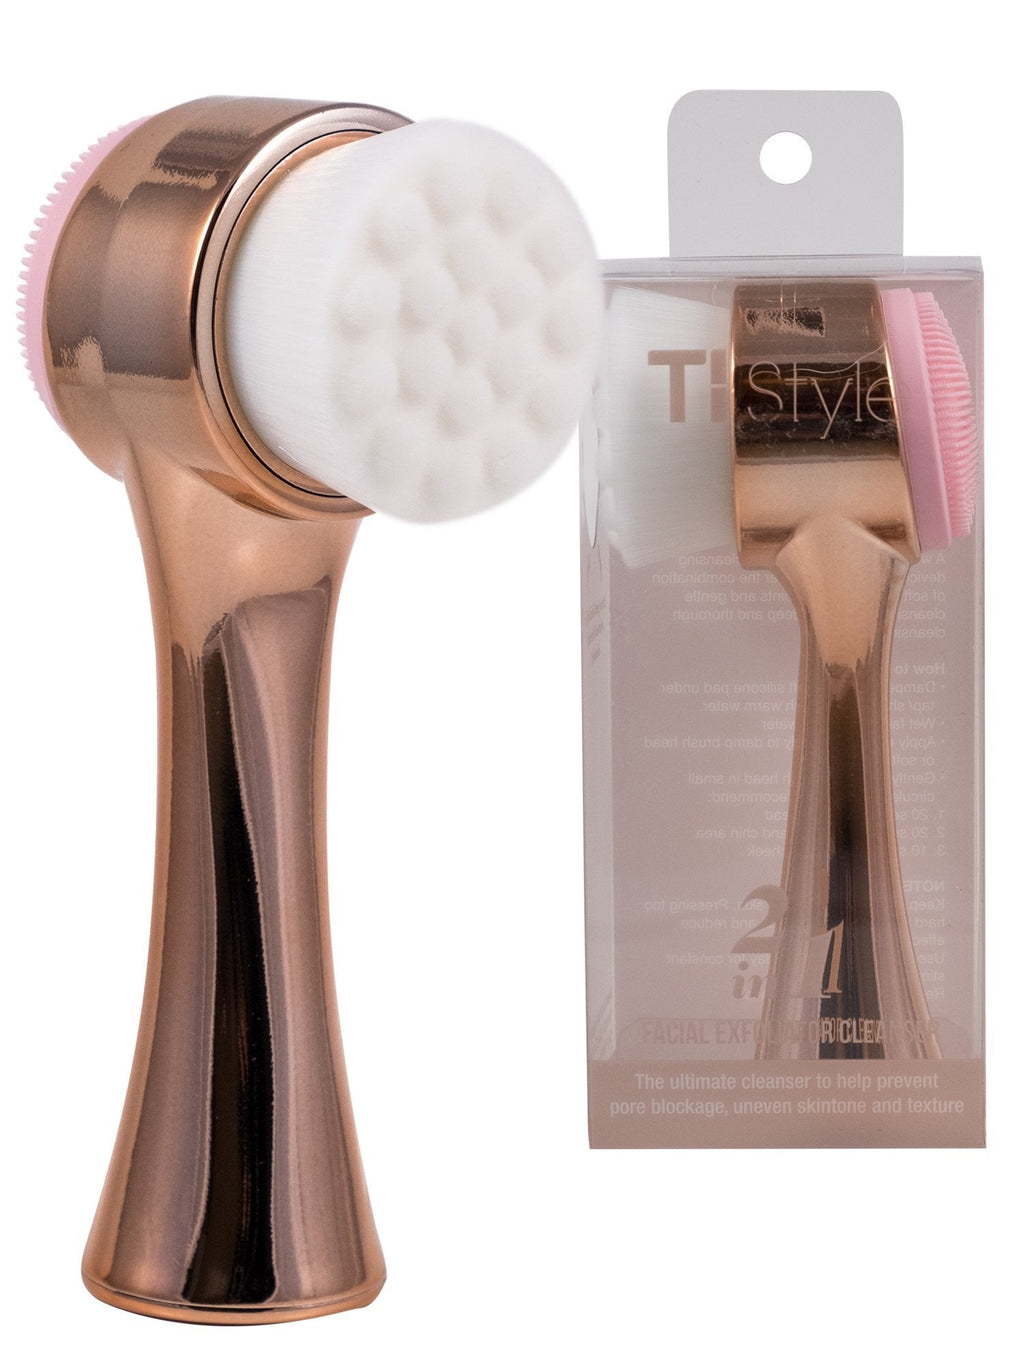 [Australia] - 2 in 1 Face Brush for Cleansing and Exfoliating - Facial Cleaning Brush with Soft Bristles - Scrubber to Massage and Scrub Your Skin - Deep Pore Exfoliation, Wash Makeup, Massaging, Acne by TI Style Rose Gold 